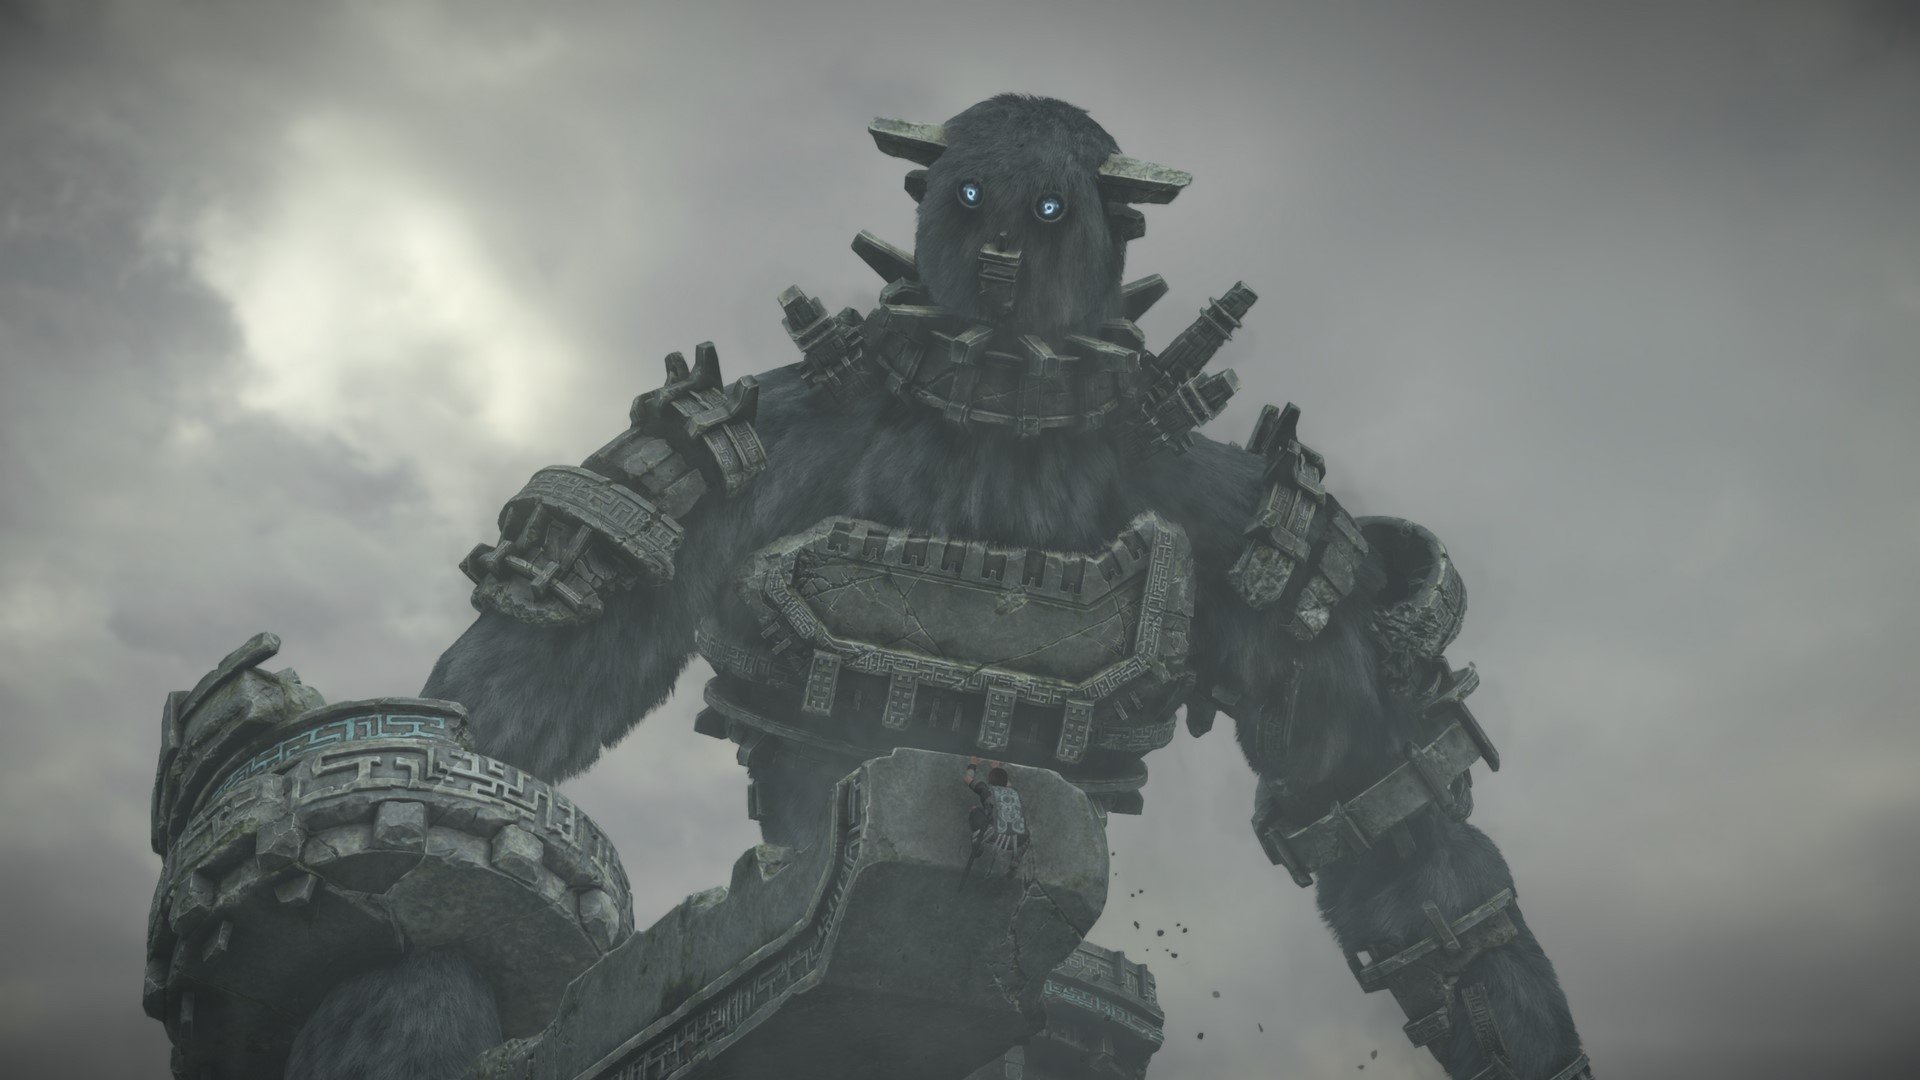 Shadow Of The Colossus review: It raises the bar for remakes, British GQ